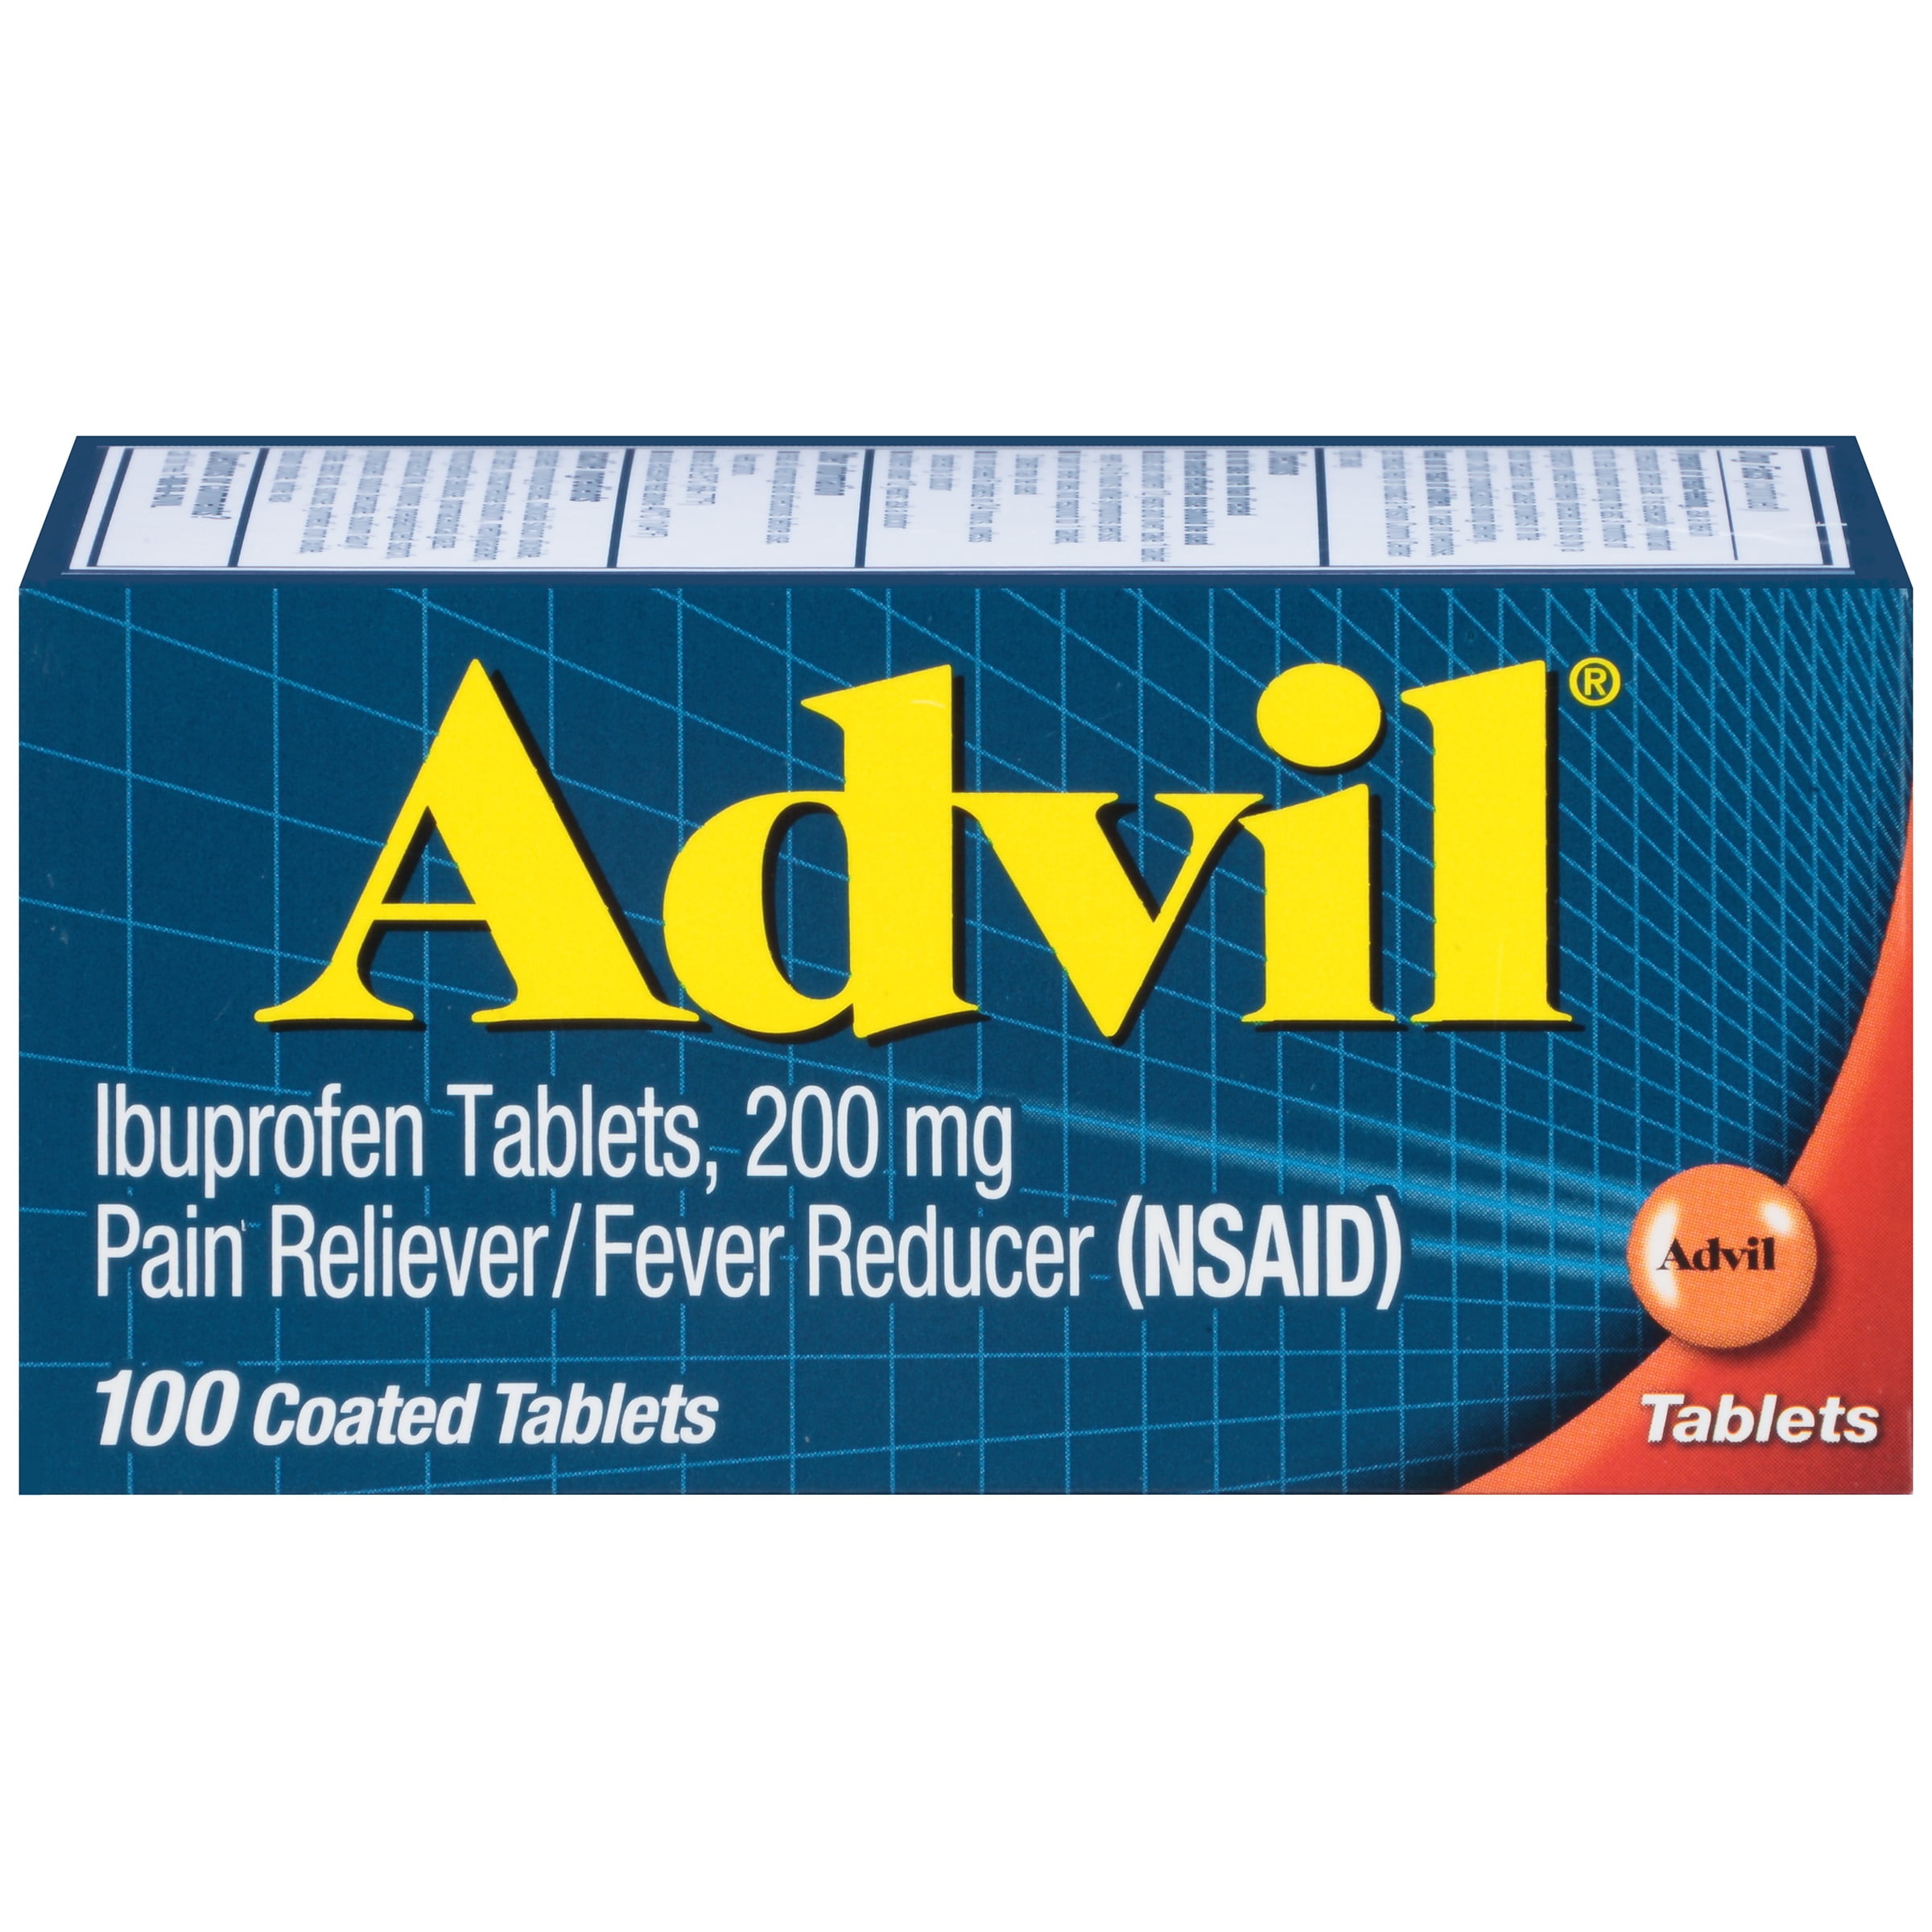 advil-pain-reliever-fever-reducer-ibuprofen-coated-tablets-200-mg-100